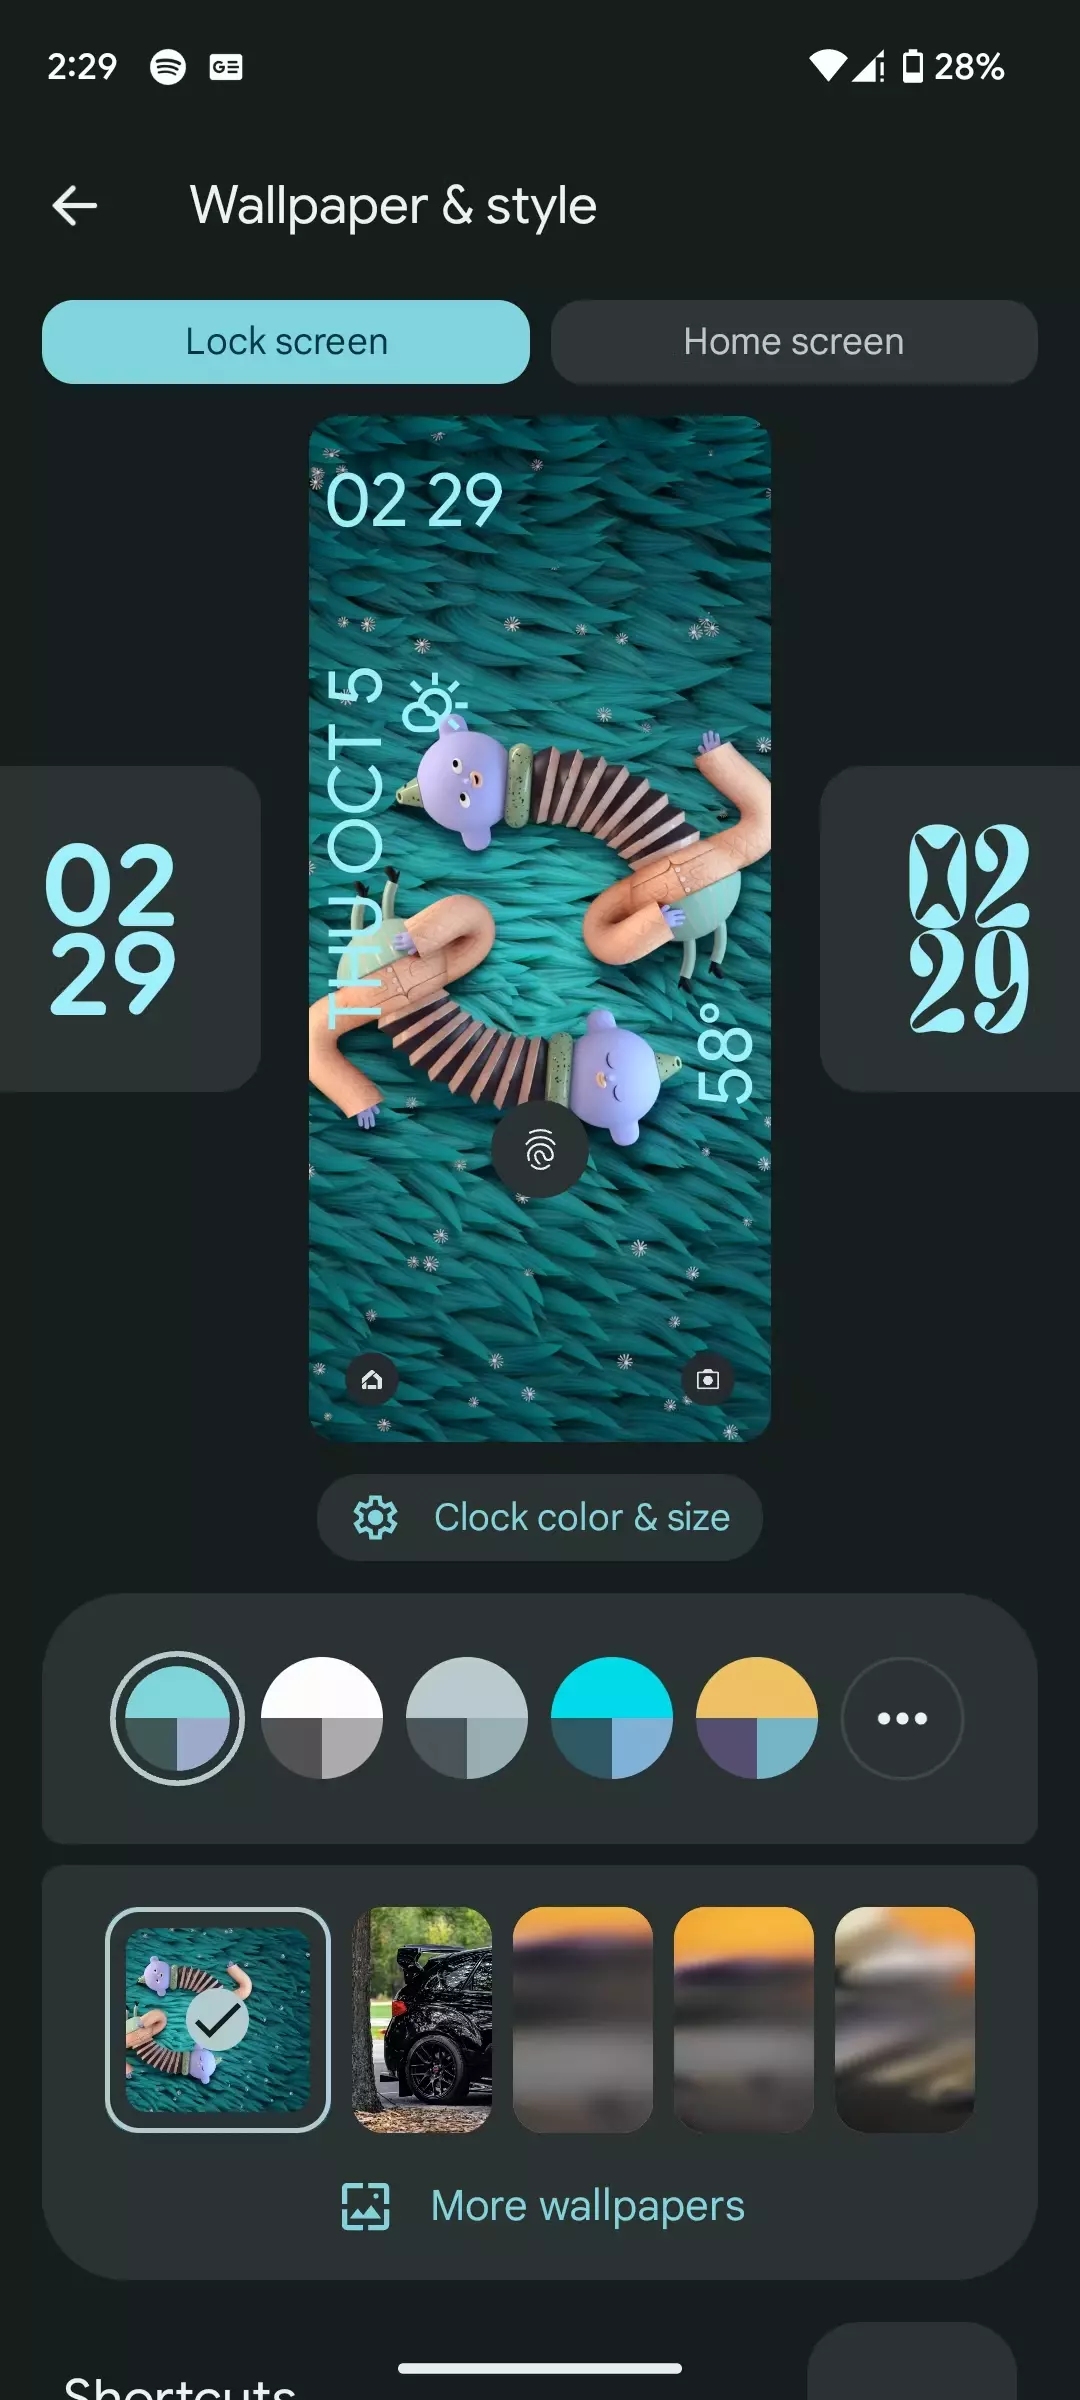 Android wallpaper & style customization page